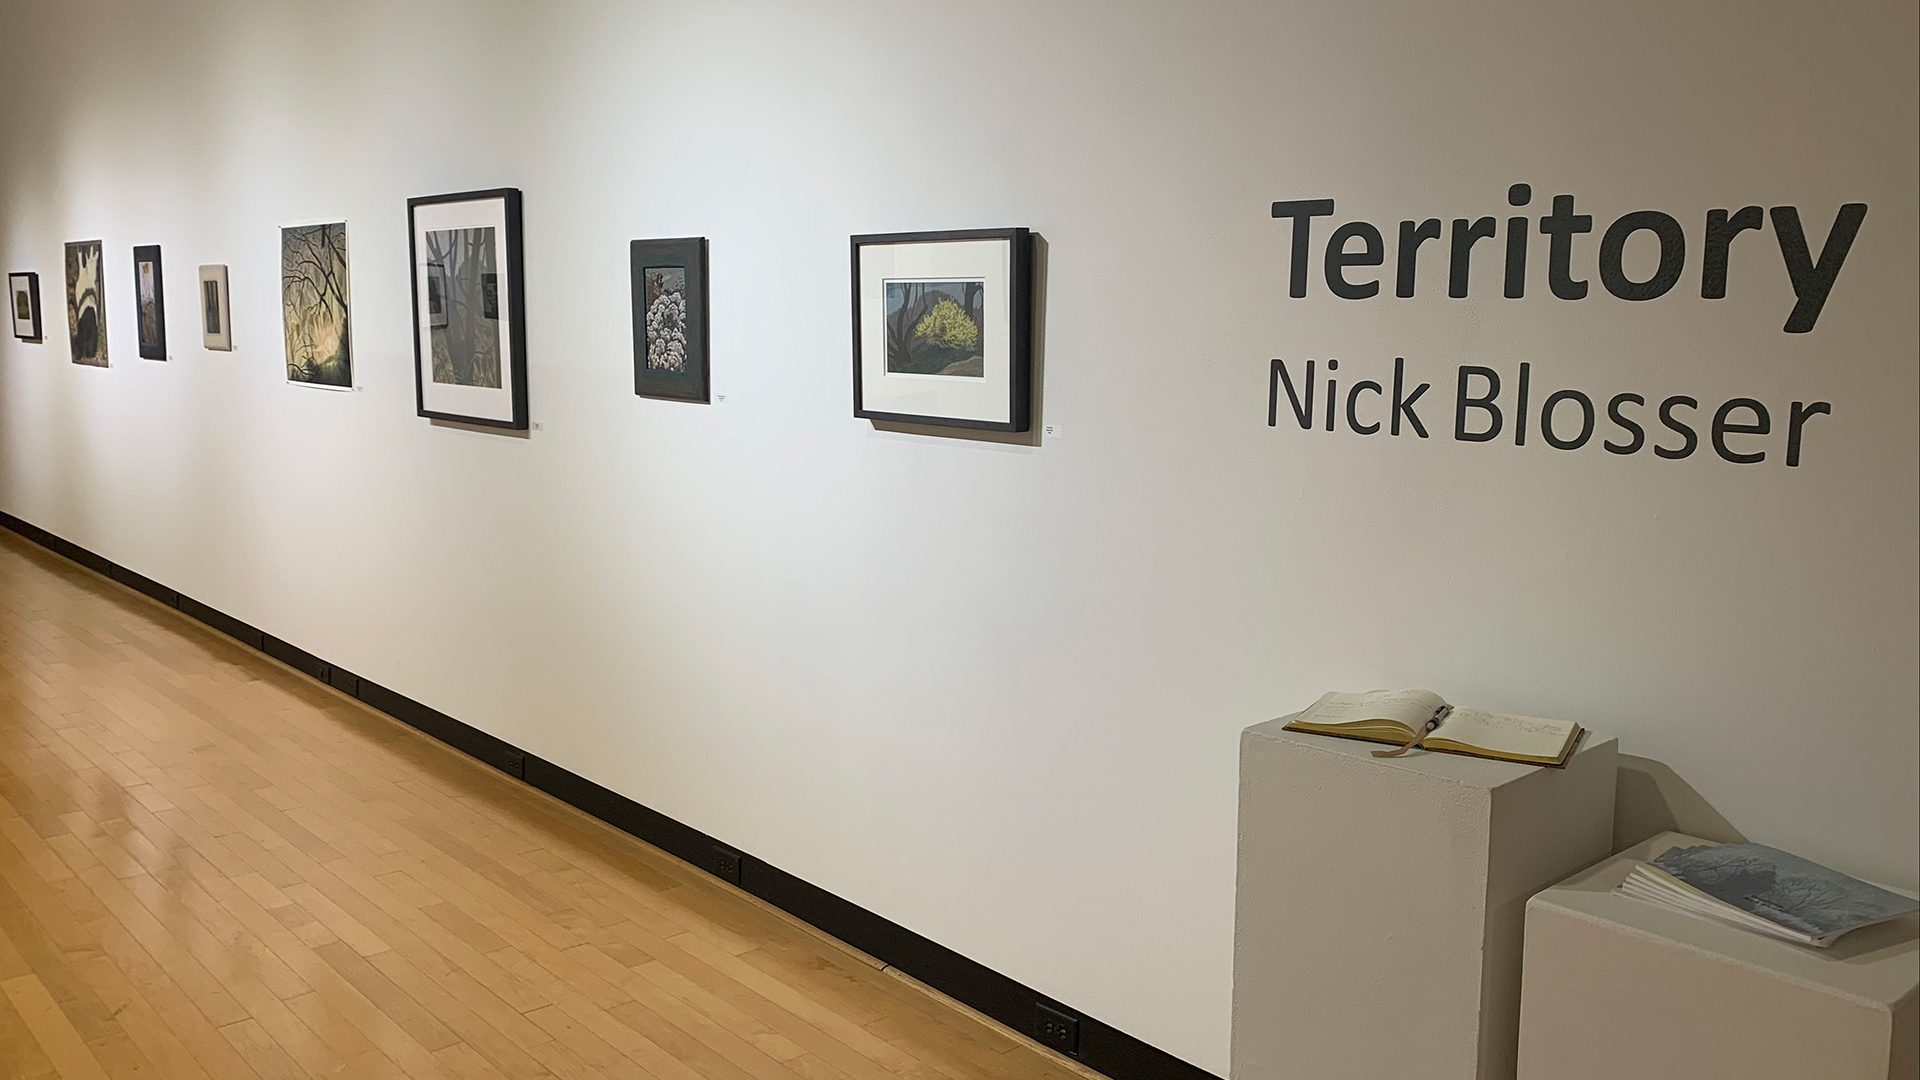 Interior view of Nick Blosser Territory exhibition at Houghton's Ortlip Gallery.